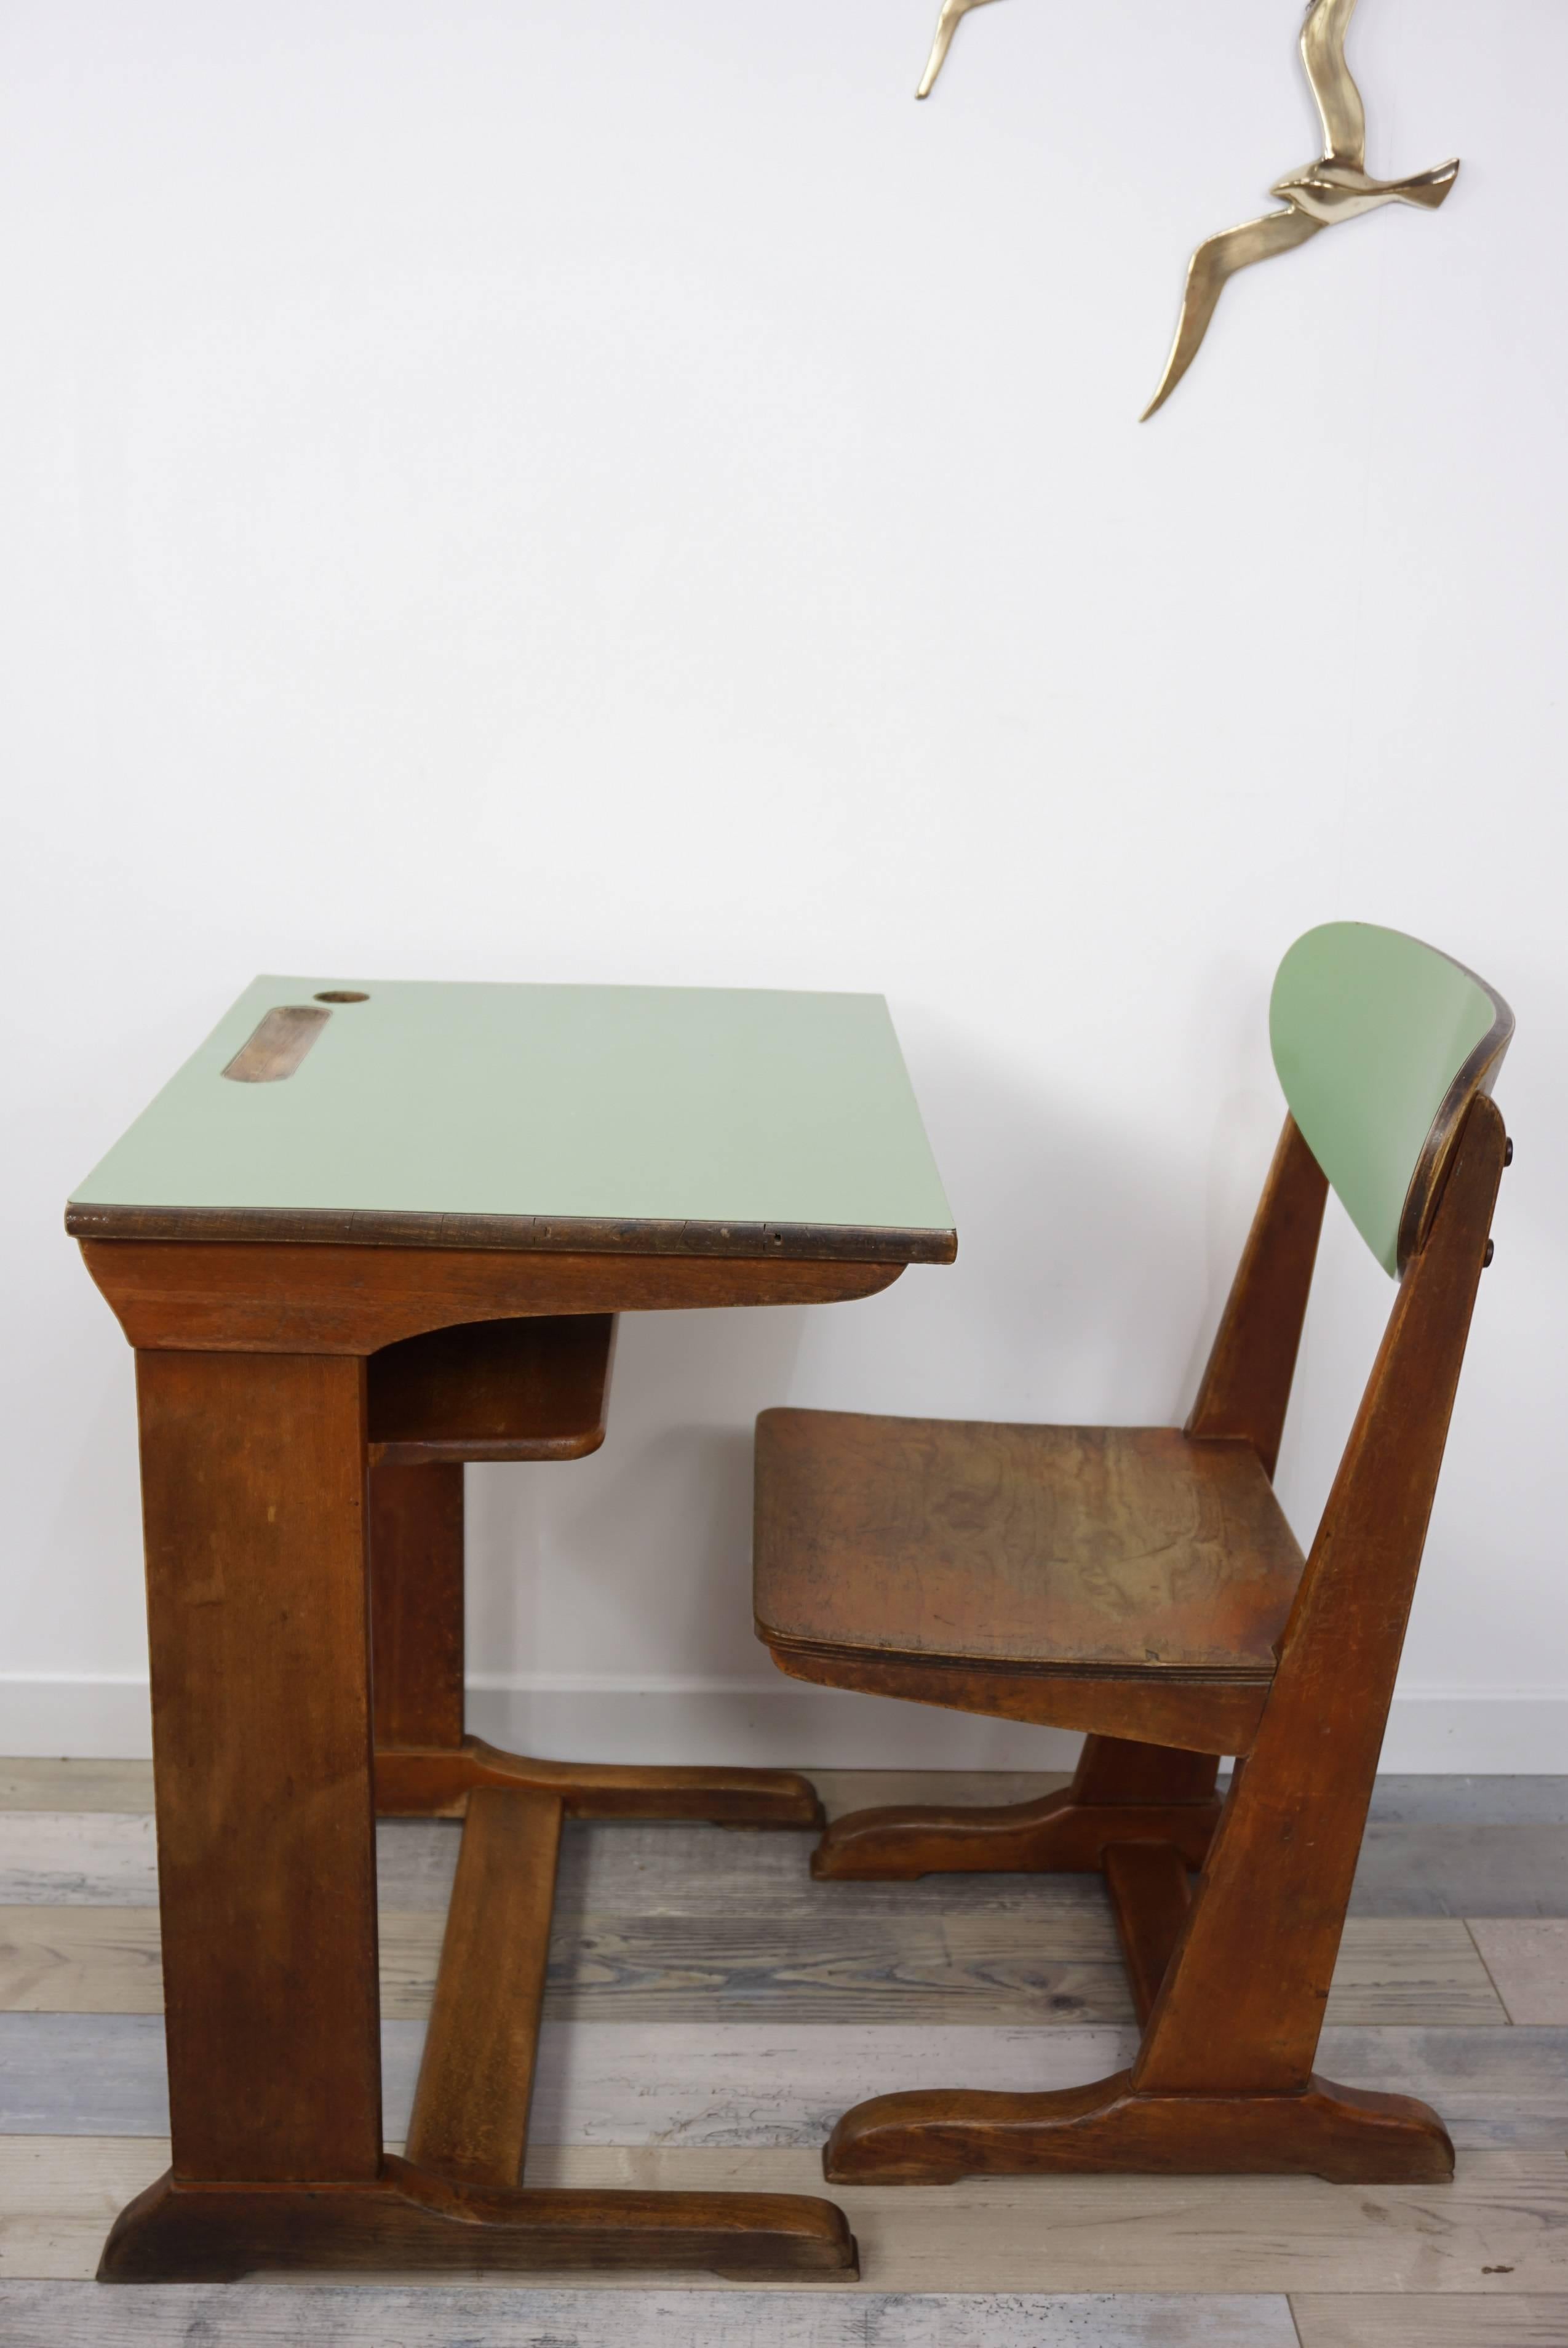 Set of schoolboy from the 1960s design by Casala composed of an adorable desk with wooden structure and tray in Formica green anise and its matching chair (H69cm/H seat 35.5cm/W36/D33 ) wooden structure and backrest dressed in green anise Formica.